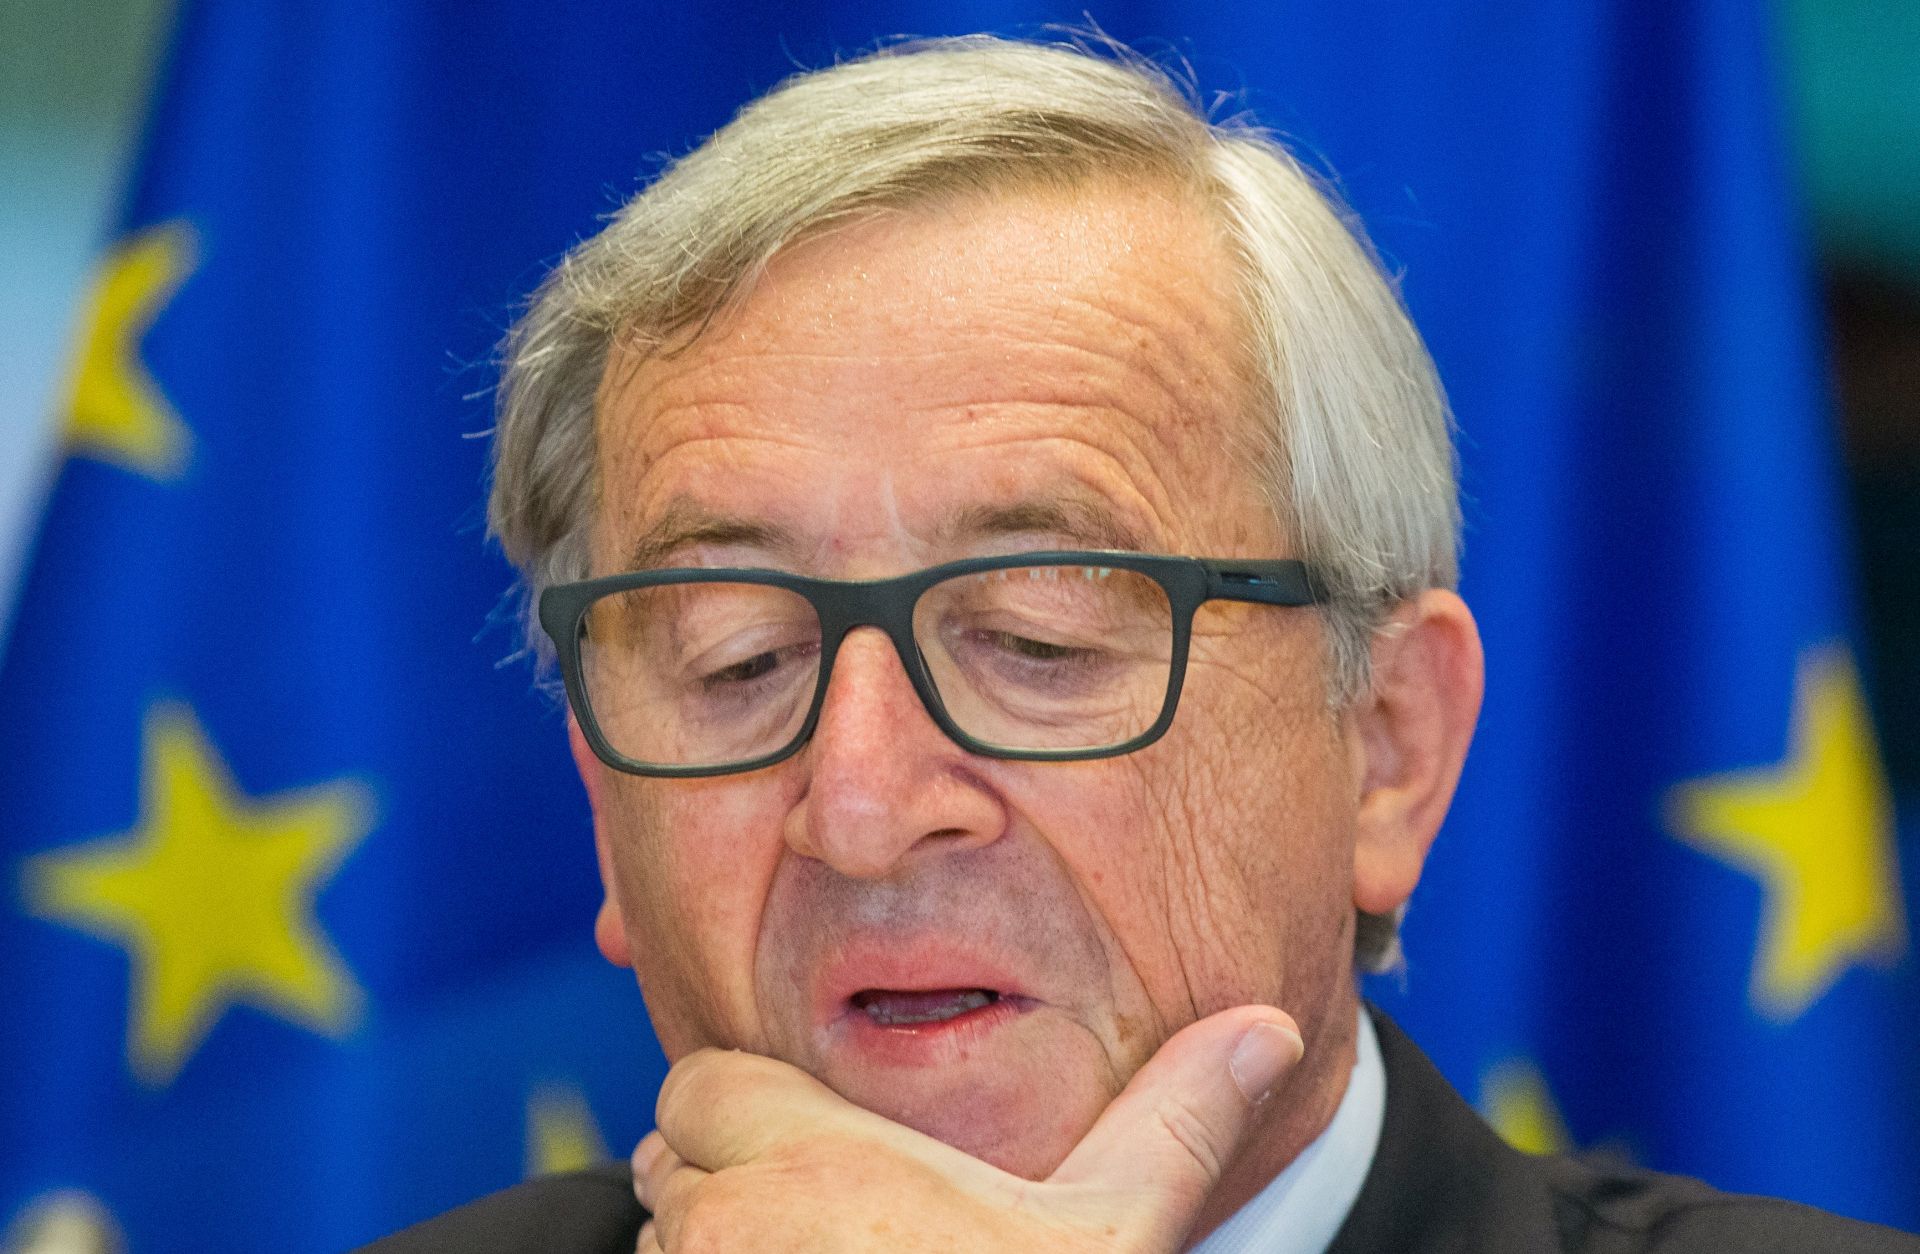 epa05999527 European Commission President Jean-Claude Juncker attends a hearing during the Committee of Inquiry on money laundering, tax avoidance and tax evasion (PANA), at the EU Parliament in Brussels, Belgium, 30 May 2017.  EPA/STEPHANIE LECOCQ